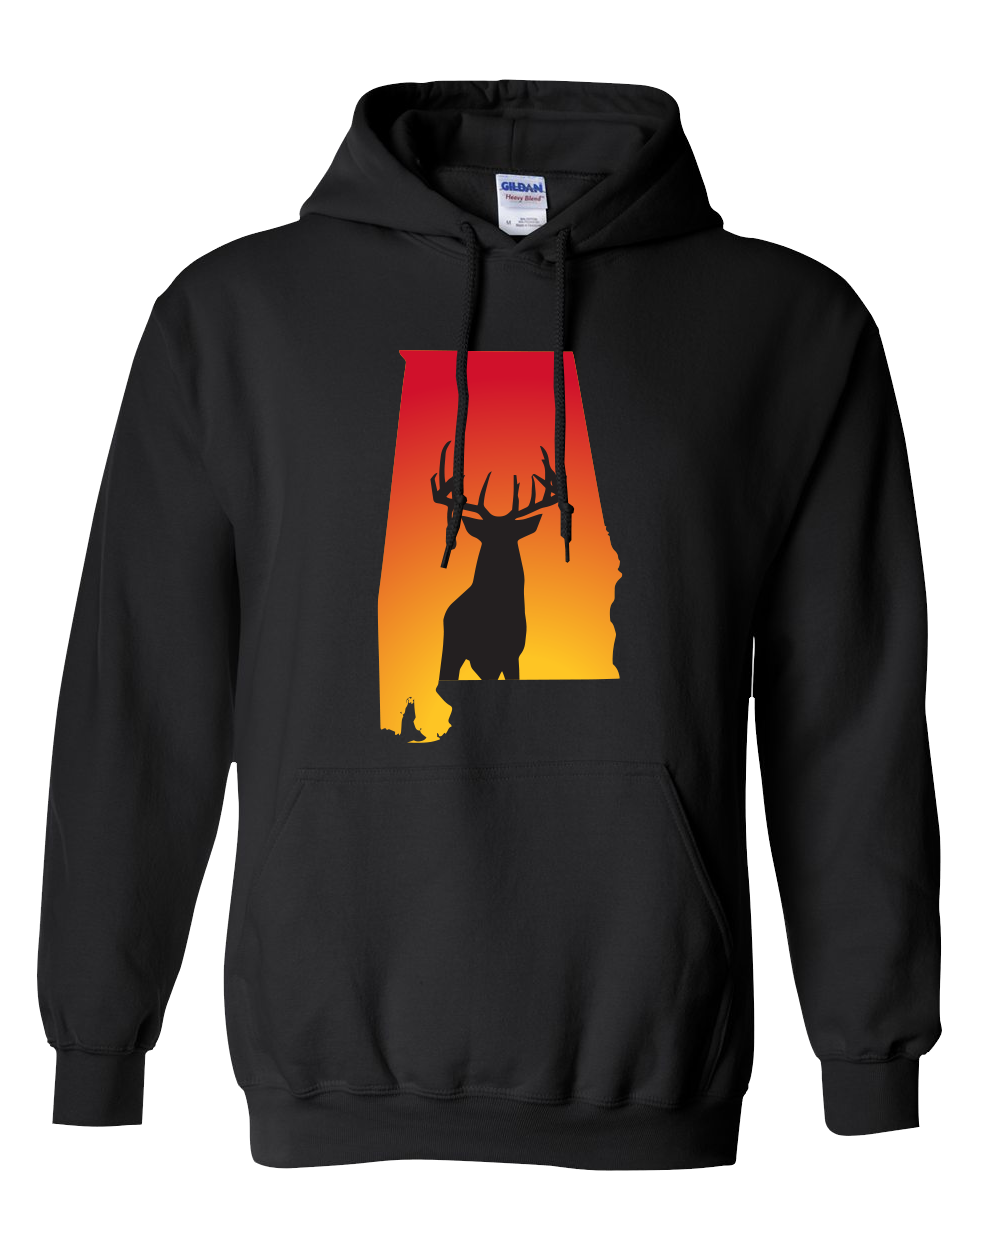 Pullover Hooded Sweatshirt Alabama Black Whitetail Deer Vibrant Design High Quality Tight Knit Ring Spun Low Maintenance Cotton Printed With The Newest Available Color Transfer Technology